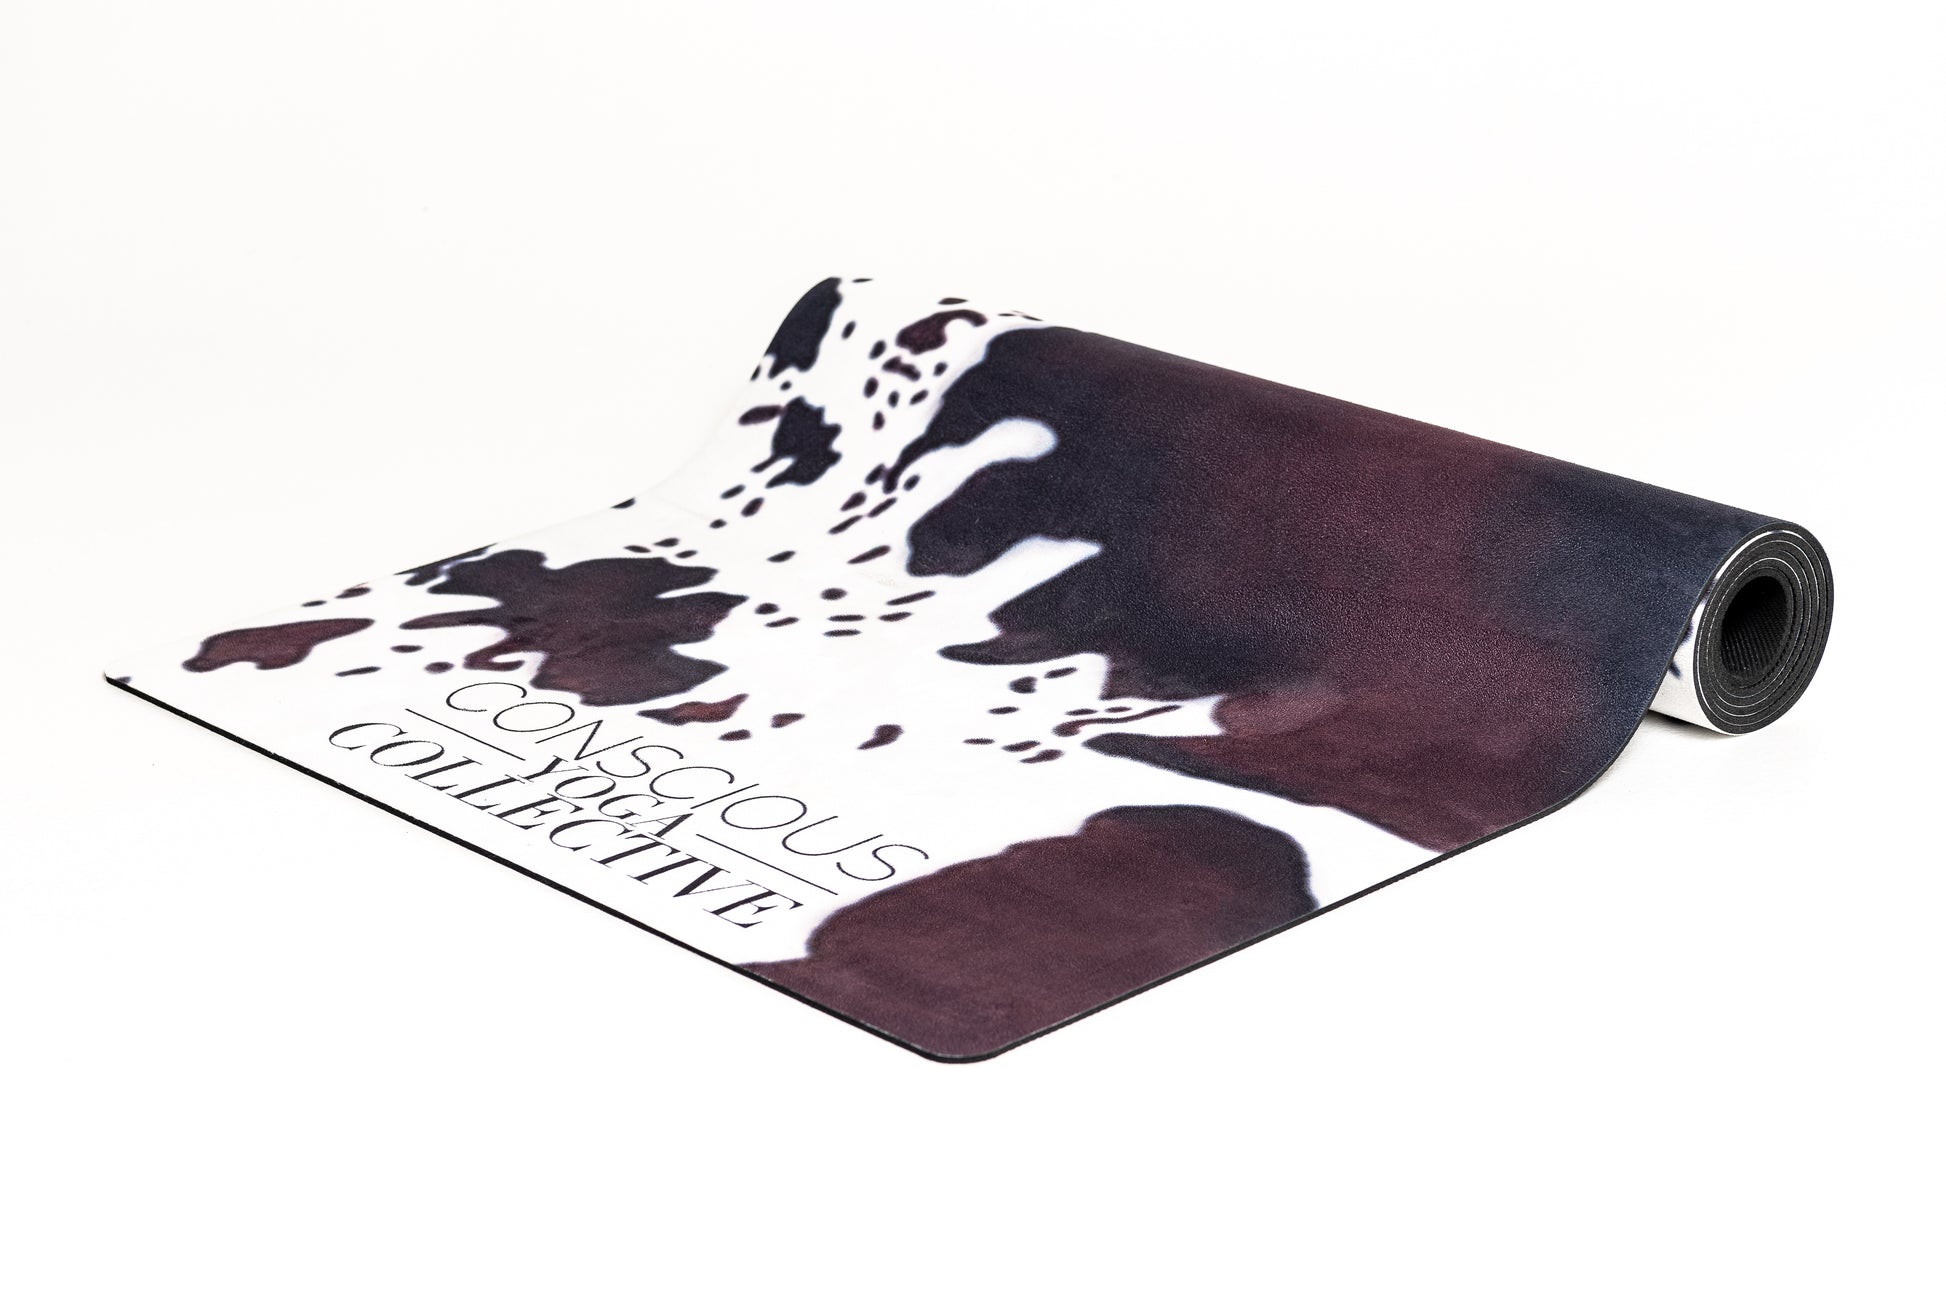 conscious yoga collective yoga mat with cowhide print in brown black and white